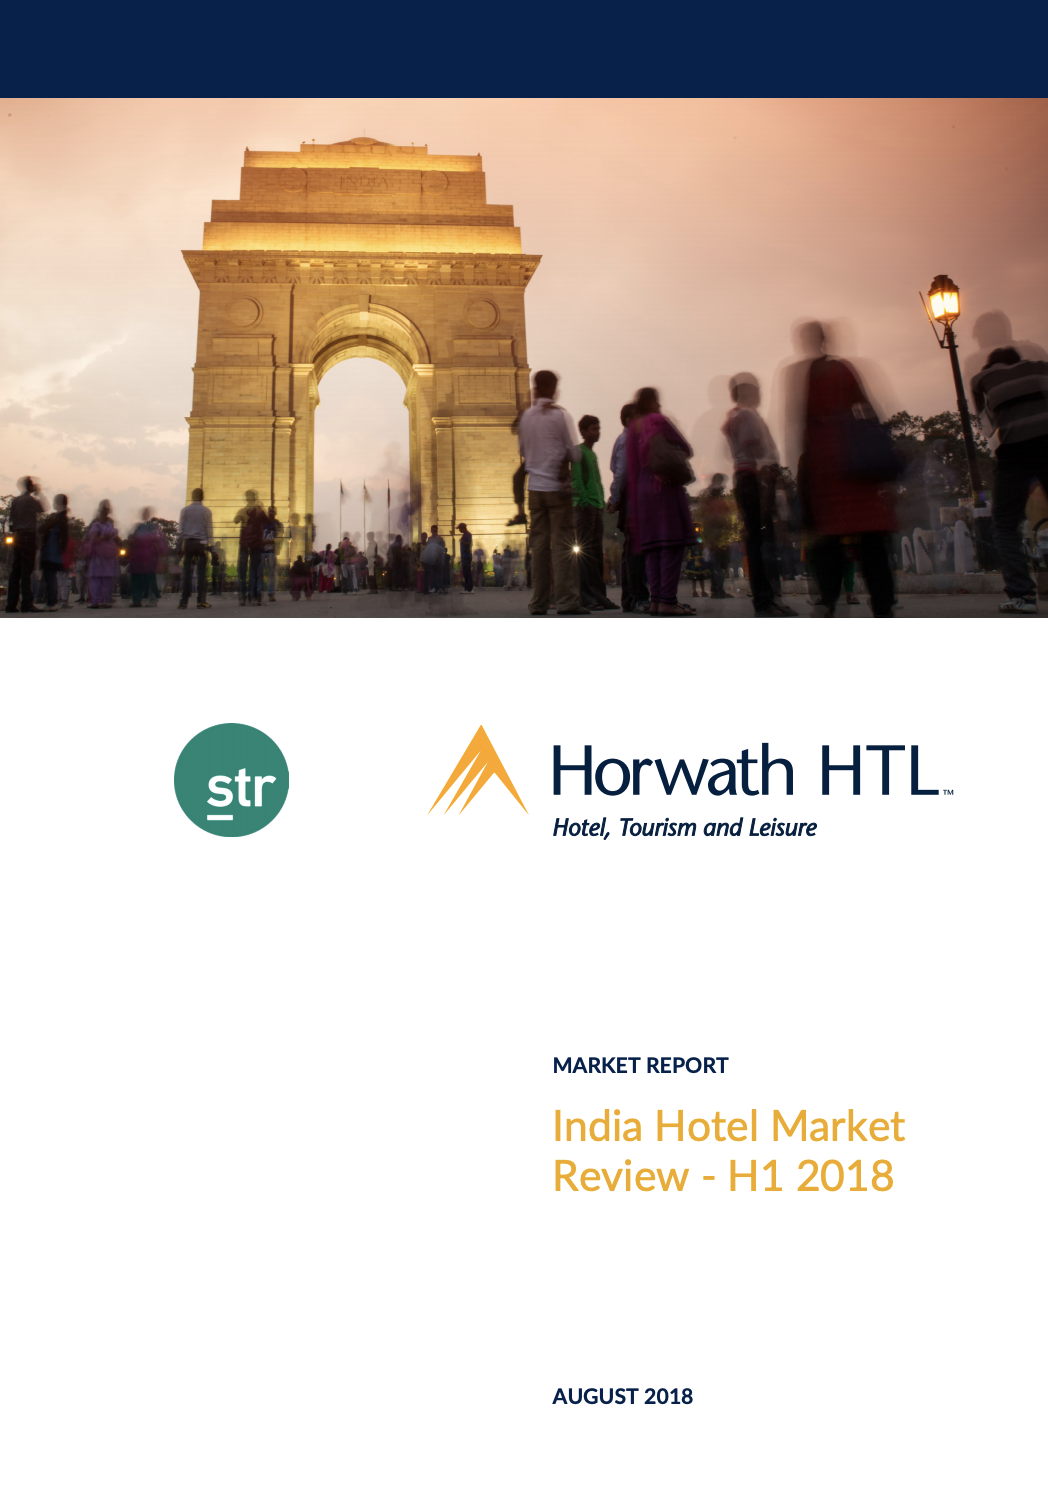 India Hotel Market Review 2018 H1